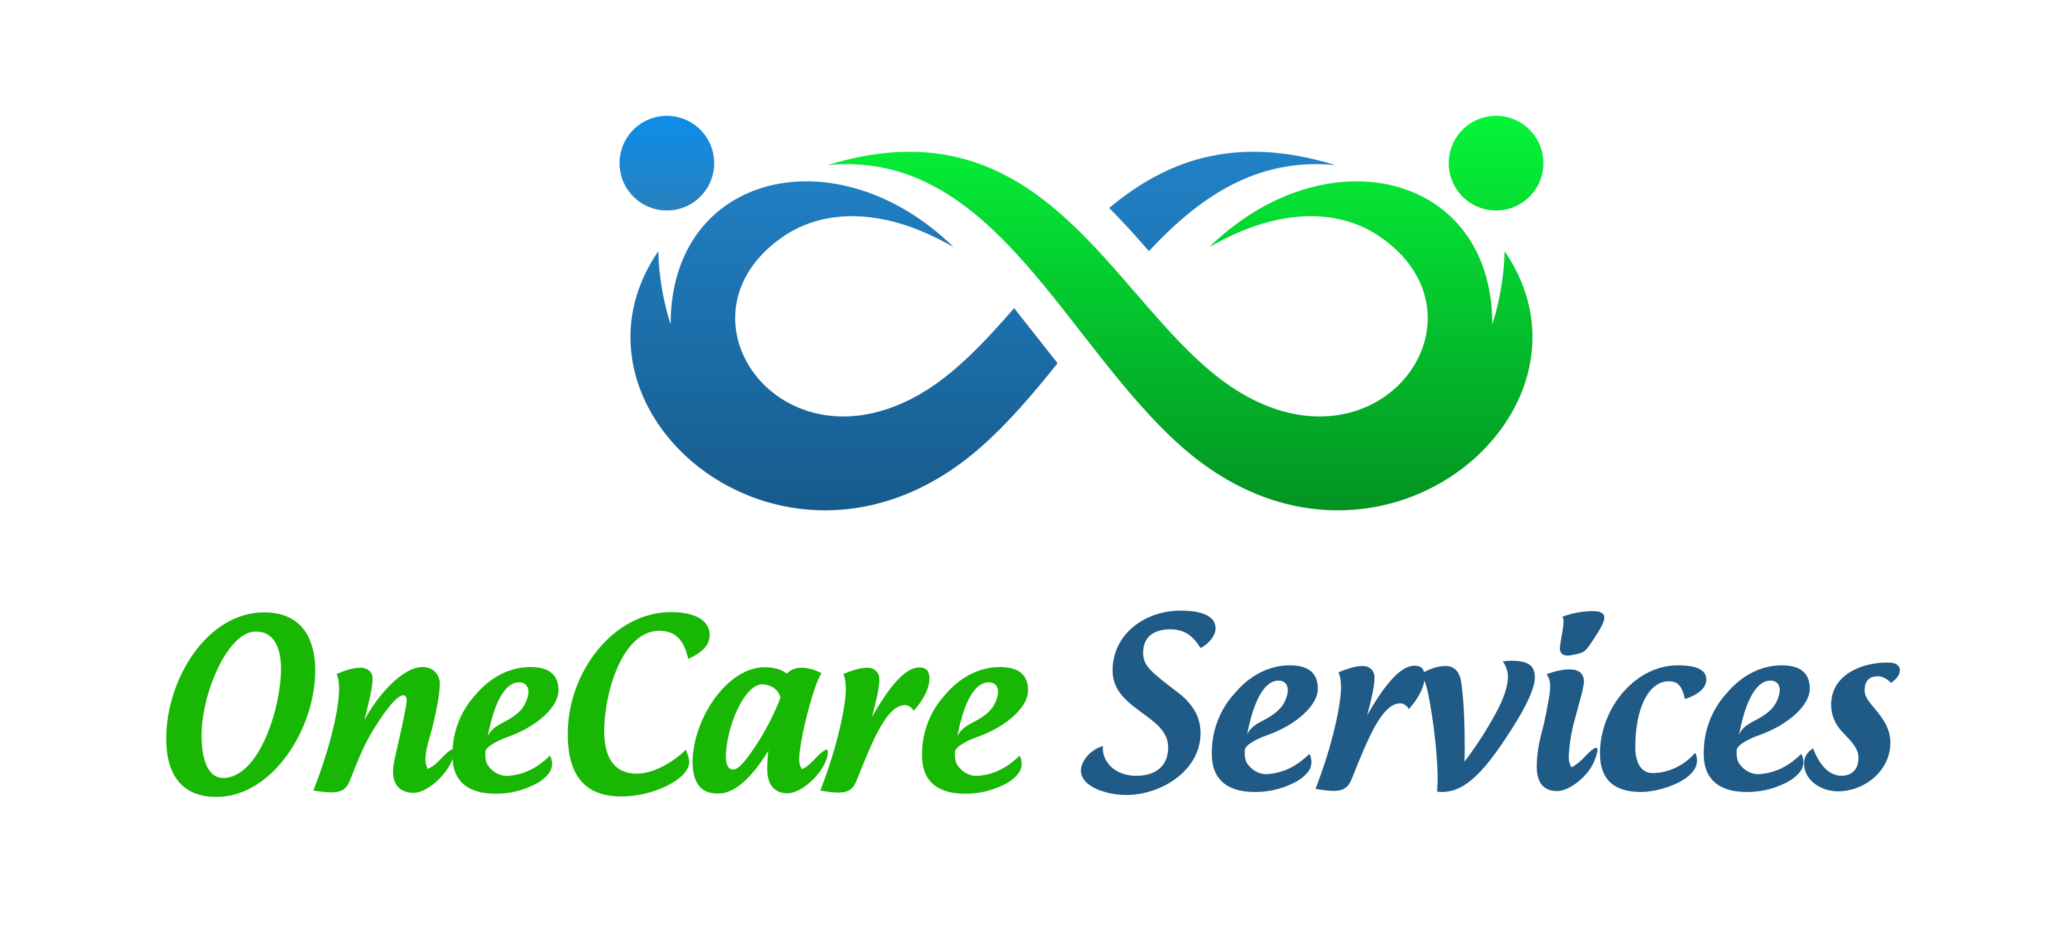 OneCare Services